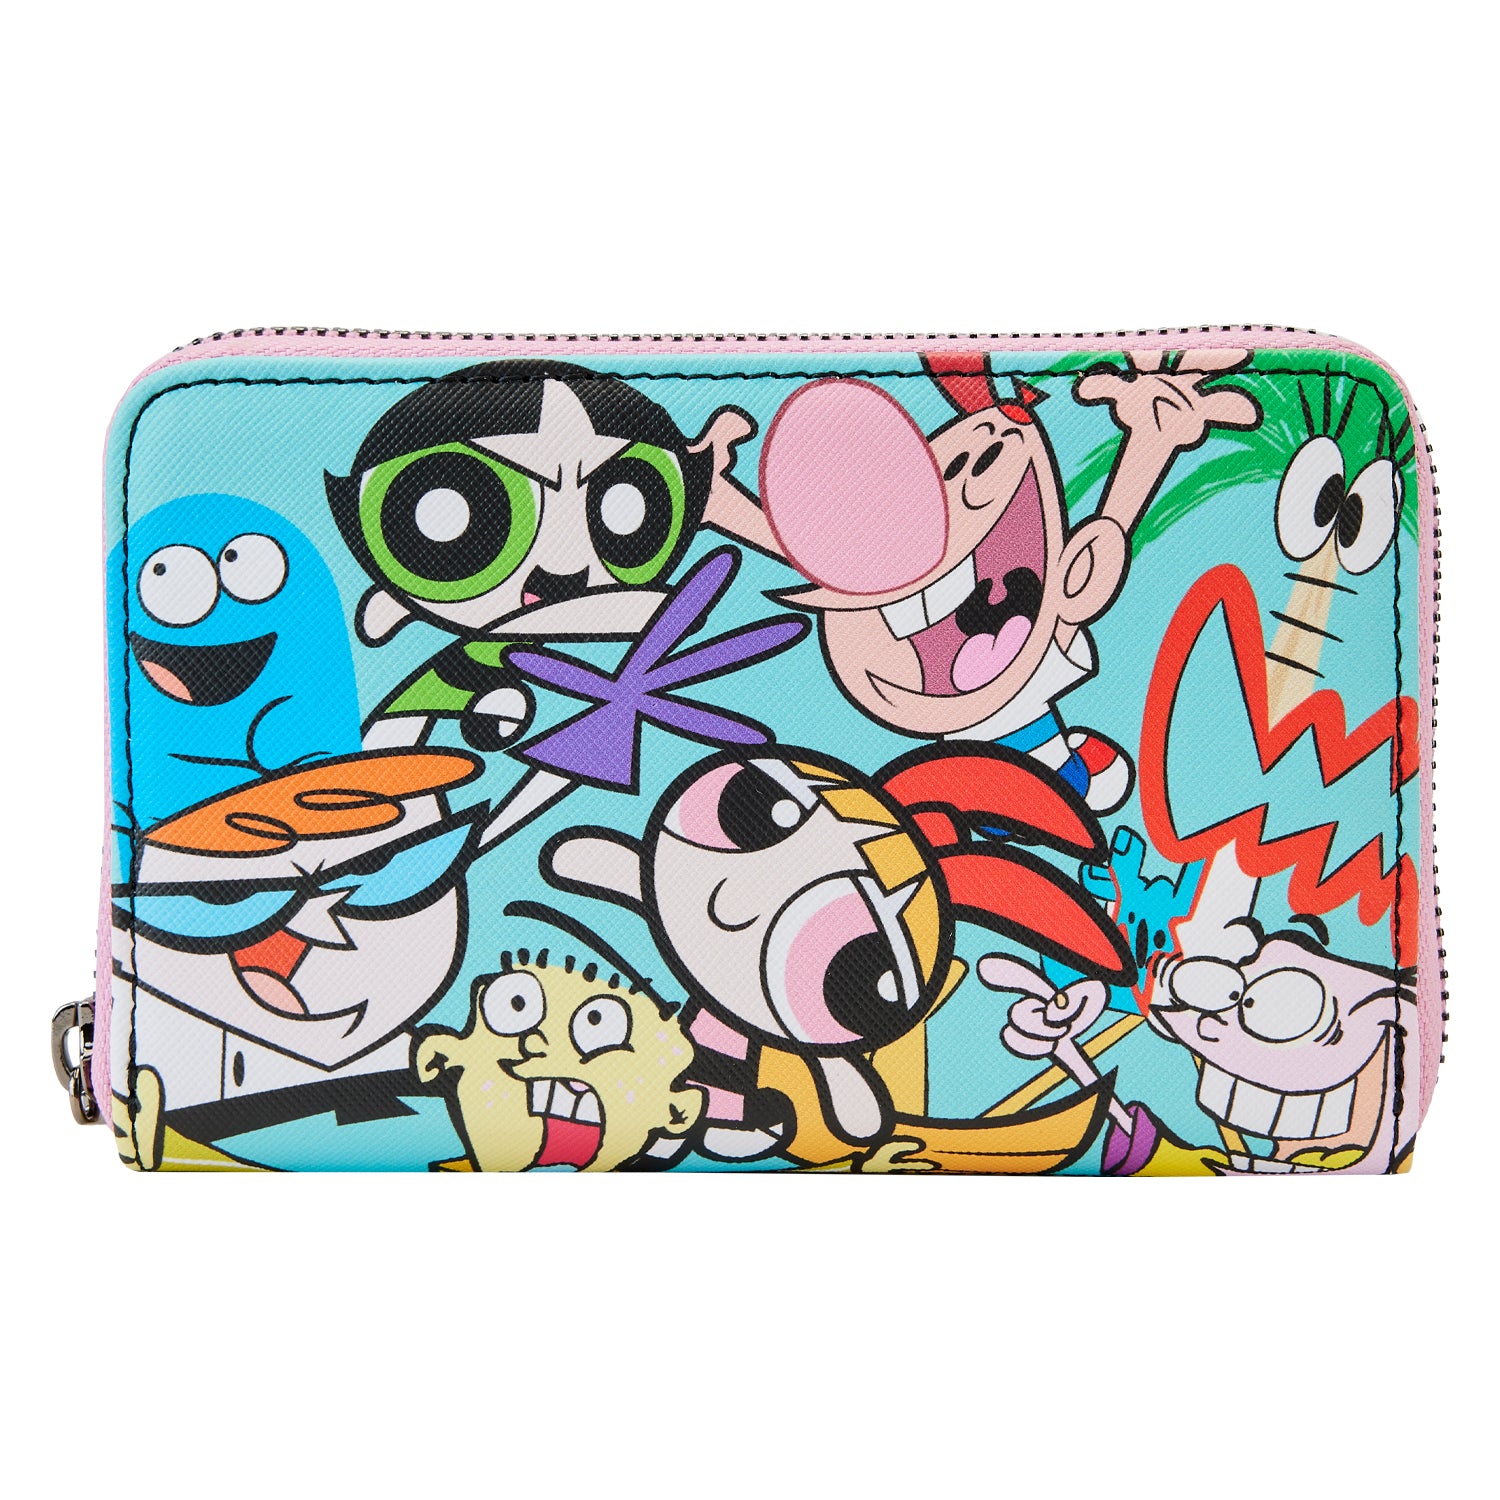 Loungefly Disney Classic Clouds AOP Ziparound Wallet